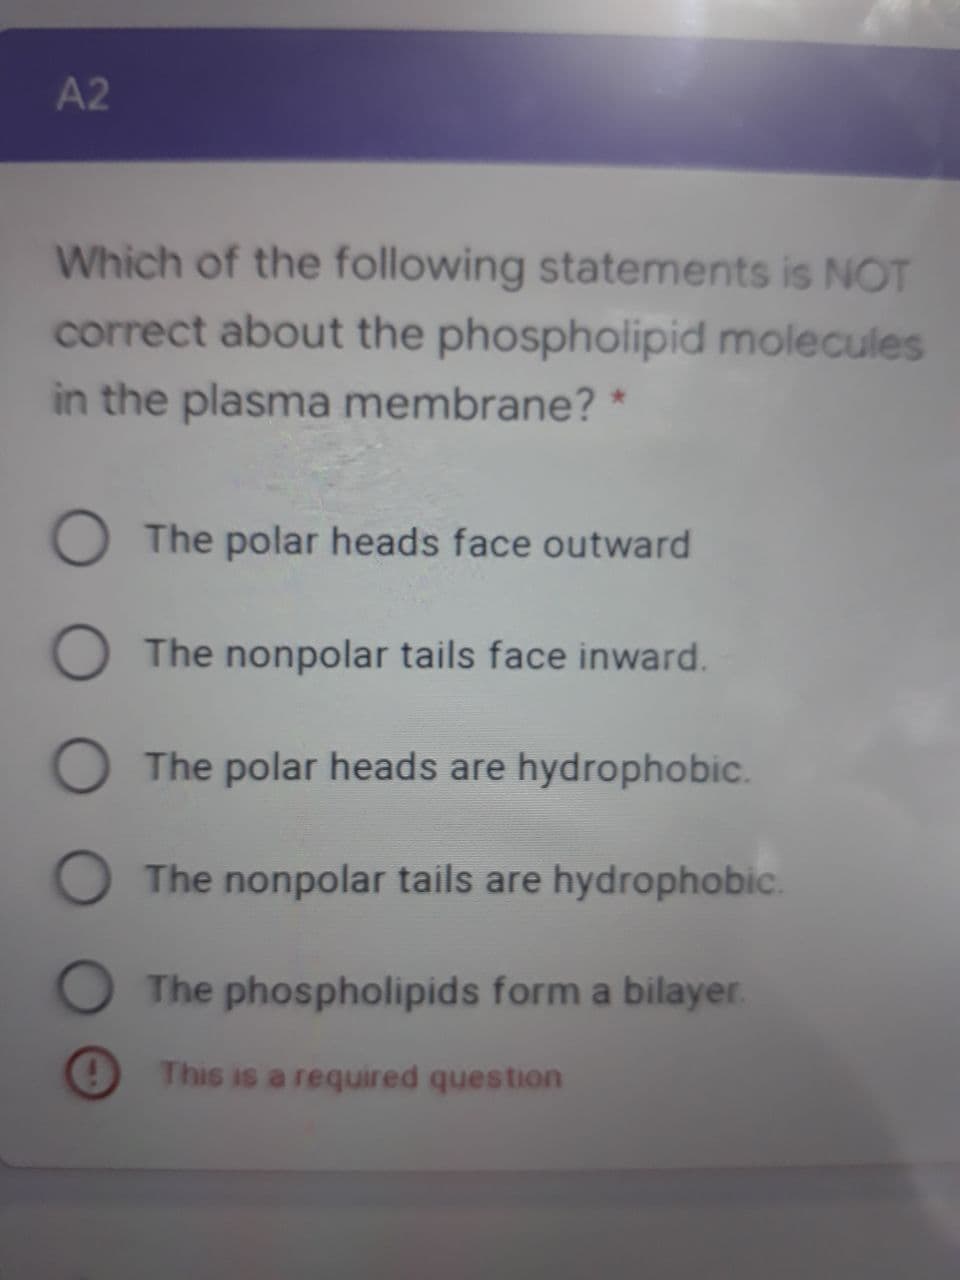 A2
Which of the following statements is NOT
correct about the phospholipid molecules
in the plasma membrane? *
O The polar heads face outward
The nonpolar tails face inward.
O The polar heads are hydrophobic.
O The nonpolar tails are hydrophobic.
The phospholipids form a bilayer.
This is a required question
